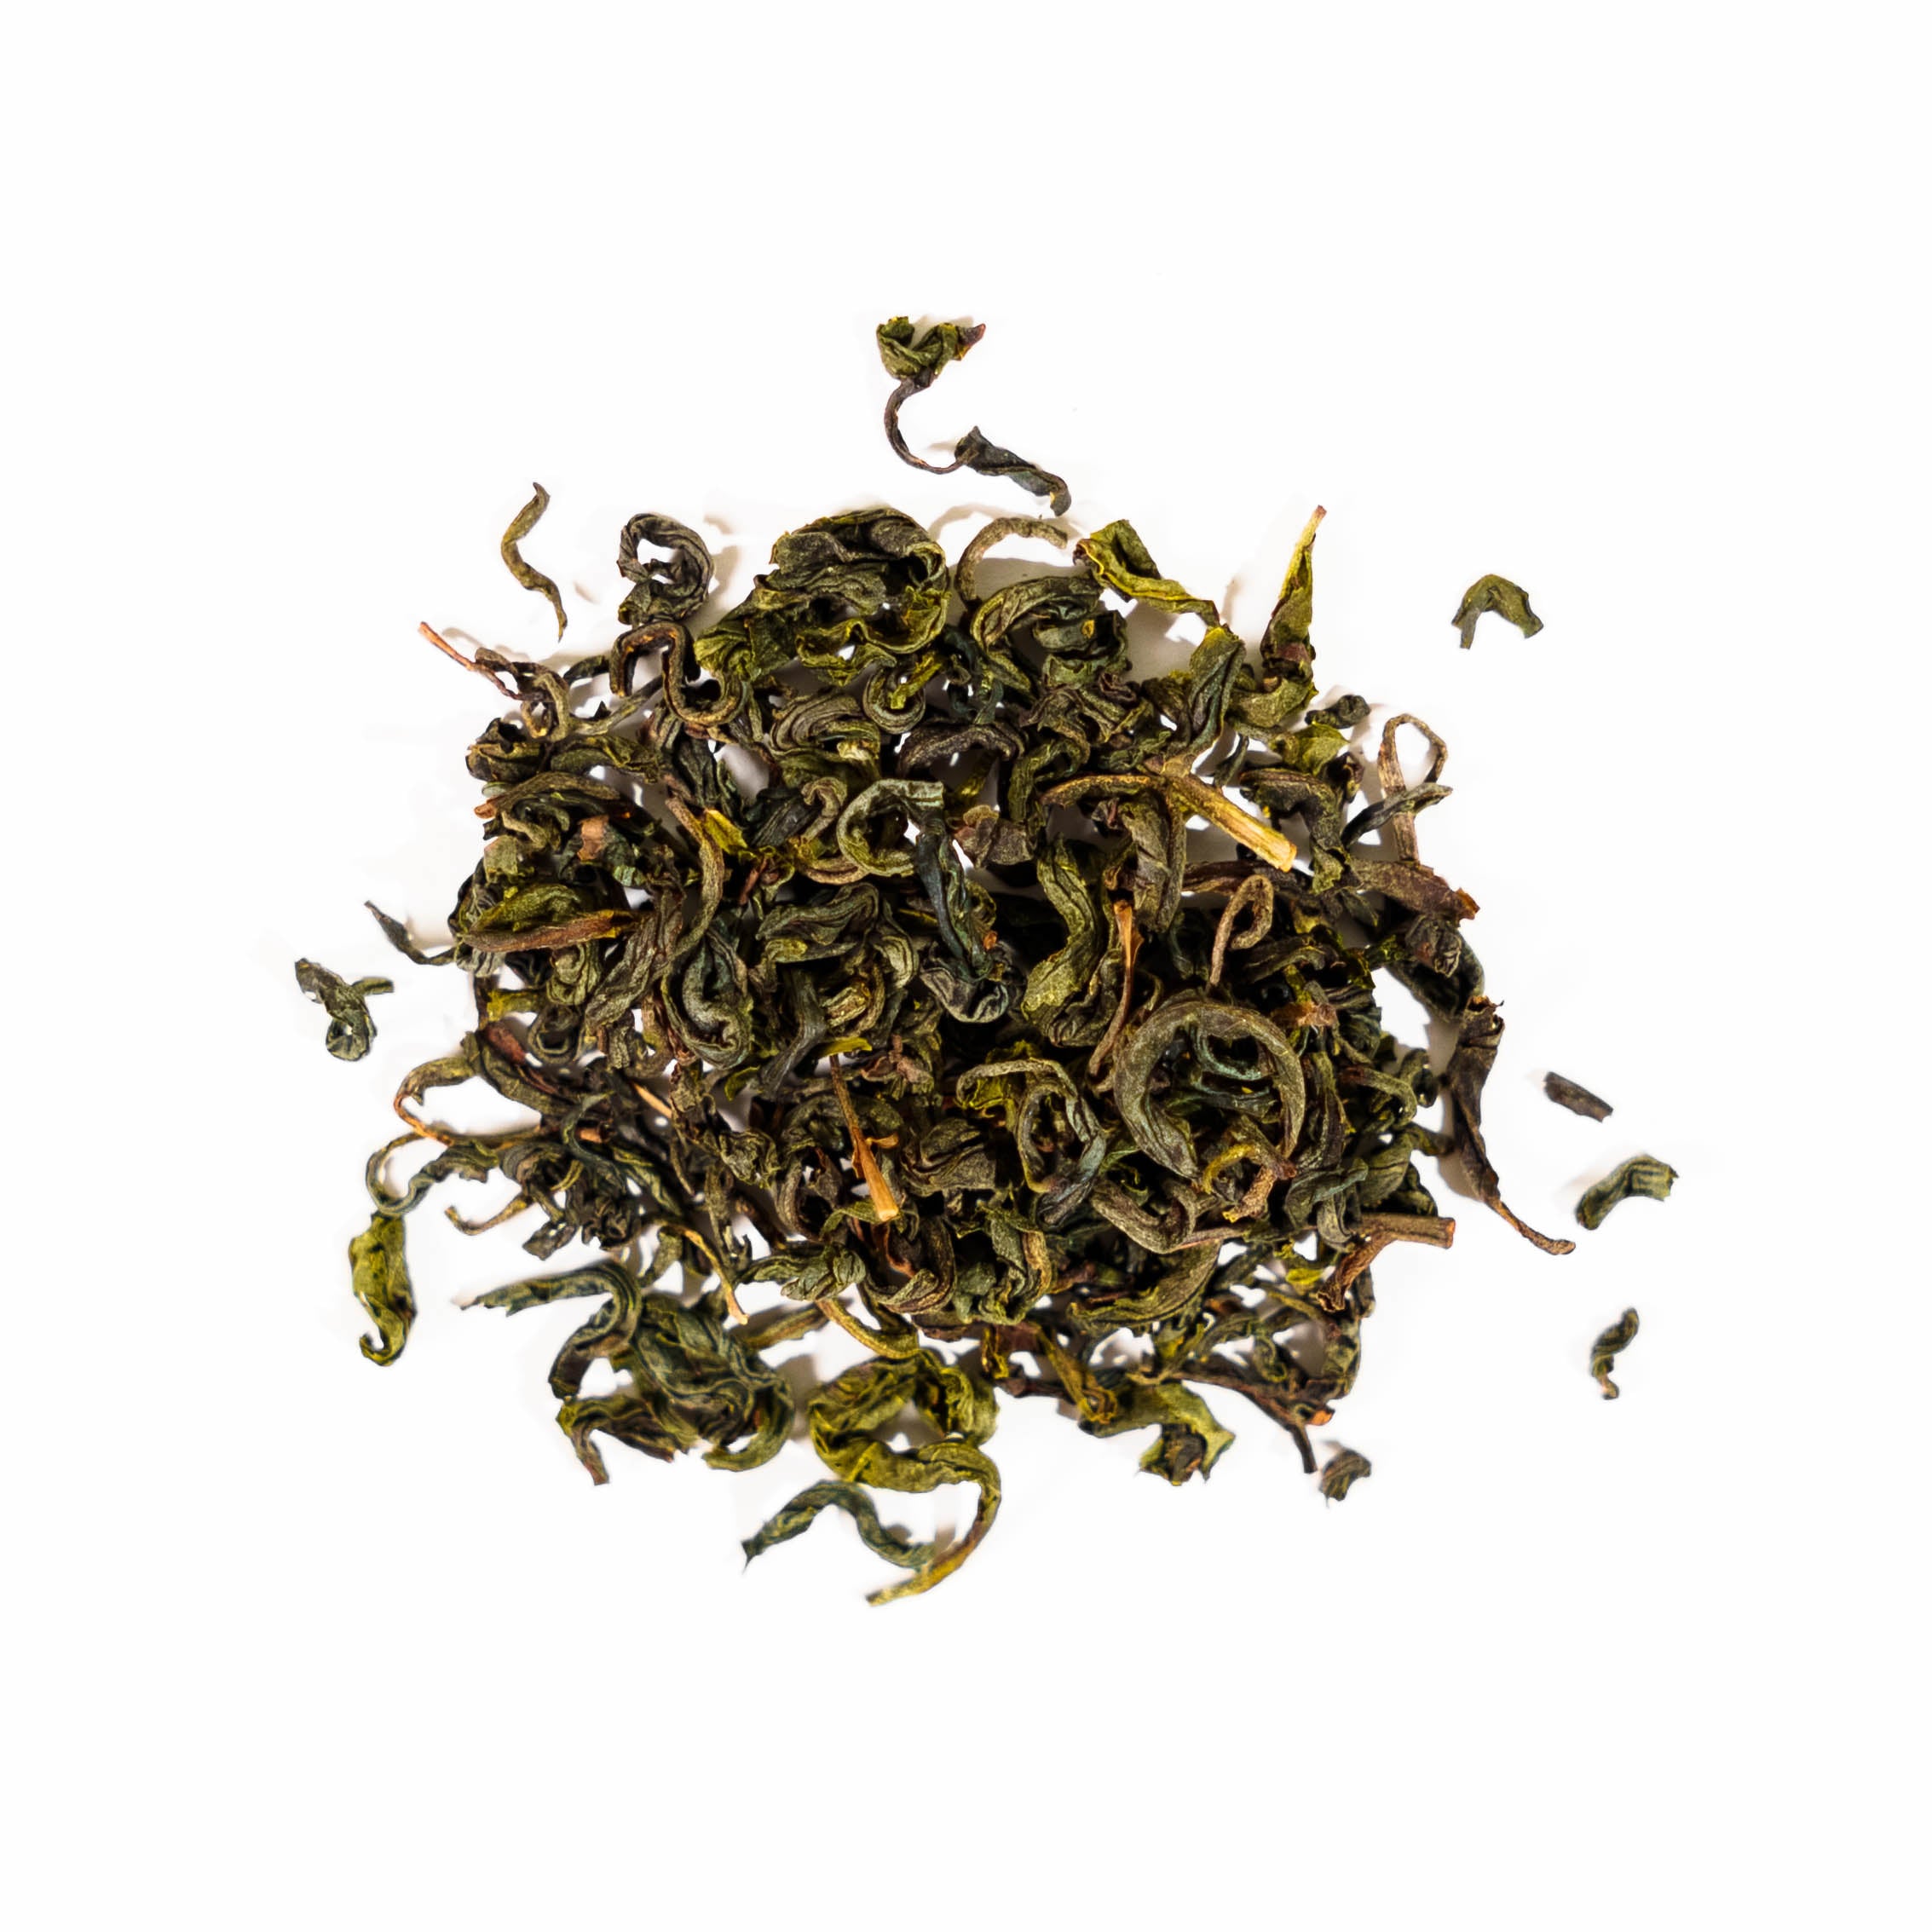 Complete Guide to Brewing Loose Leaf Oolong Tea (UPDATED) - Eco